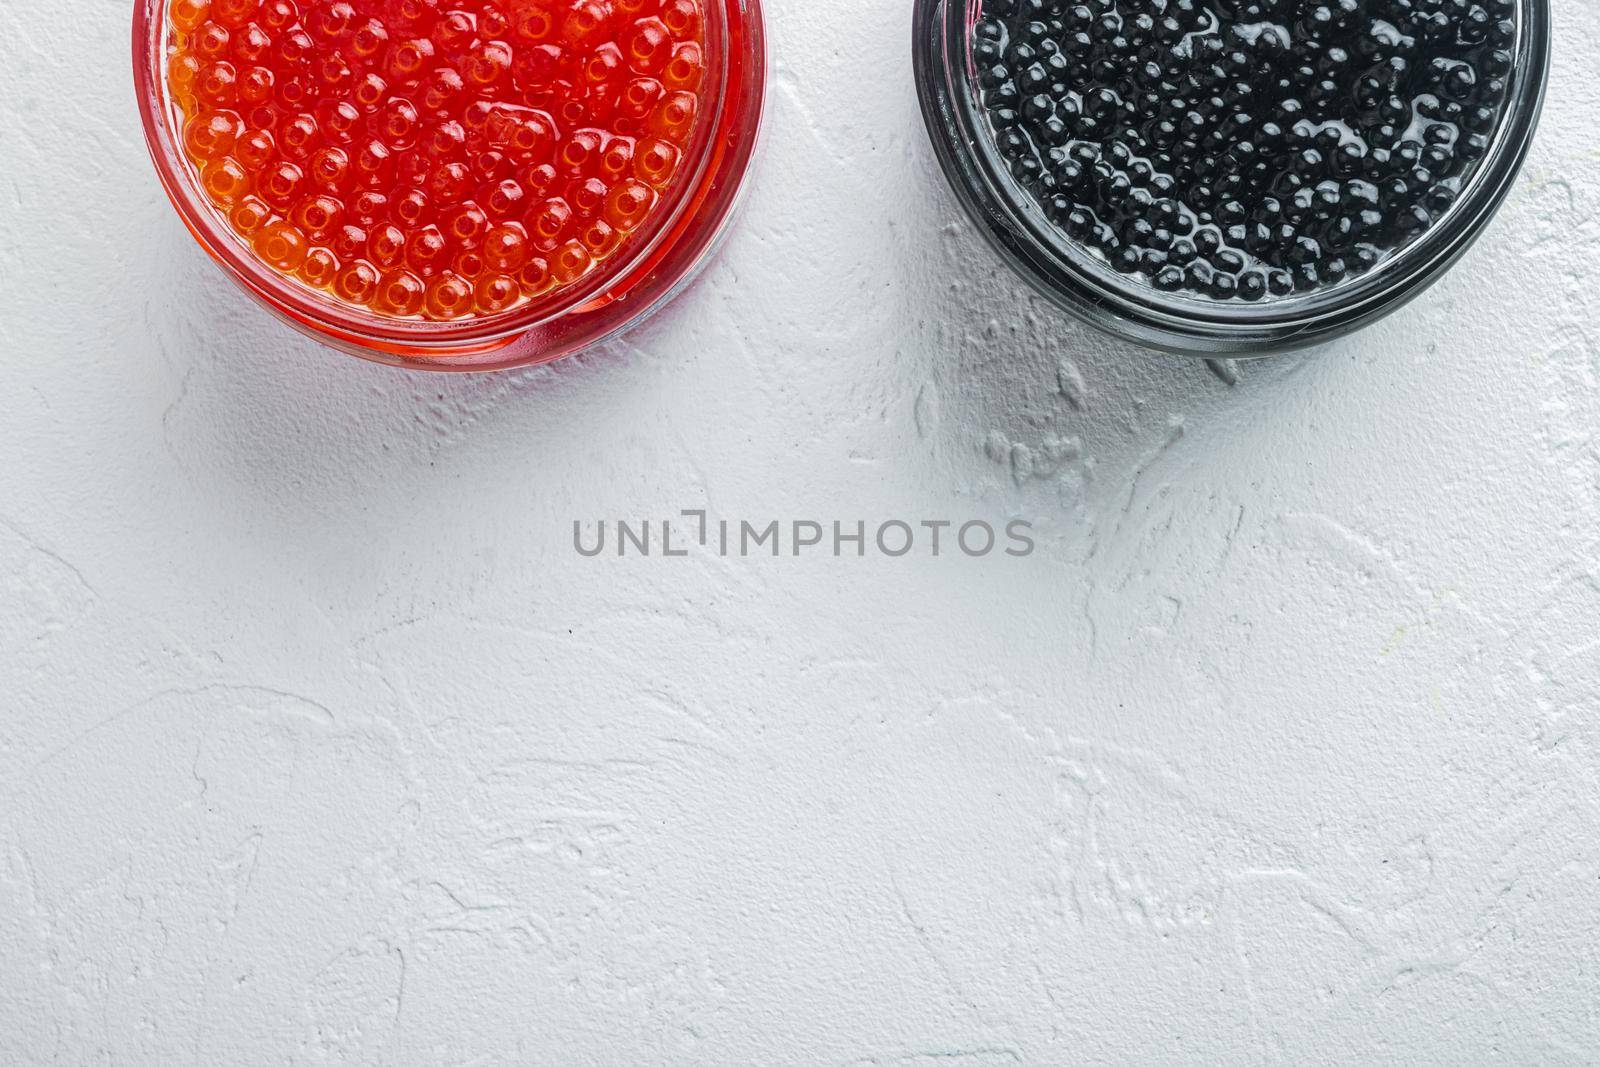 Red and black caviar in bowl, on white background, top view flat lay with copy space for text by Ilianesolenyi